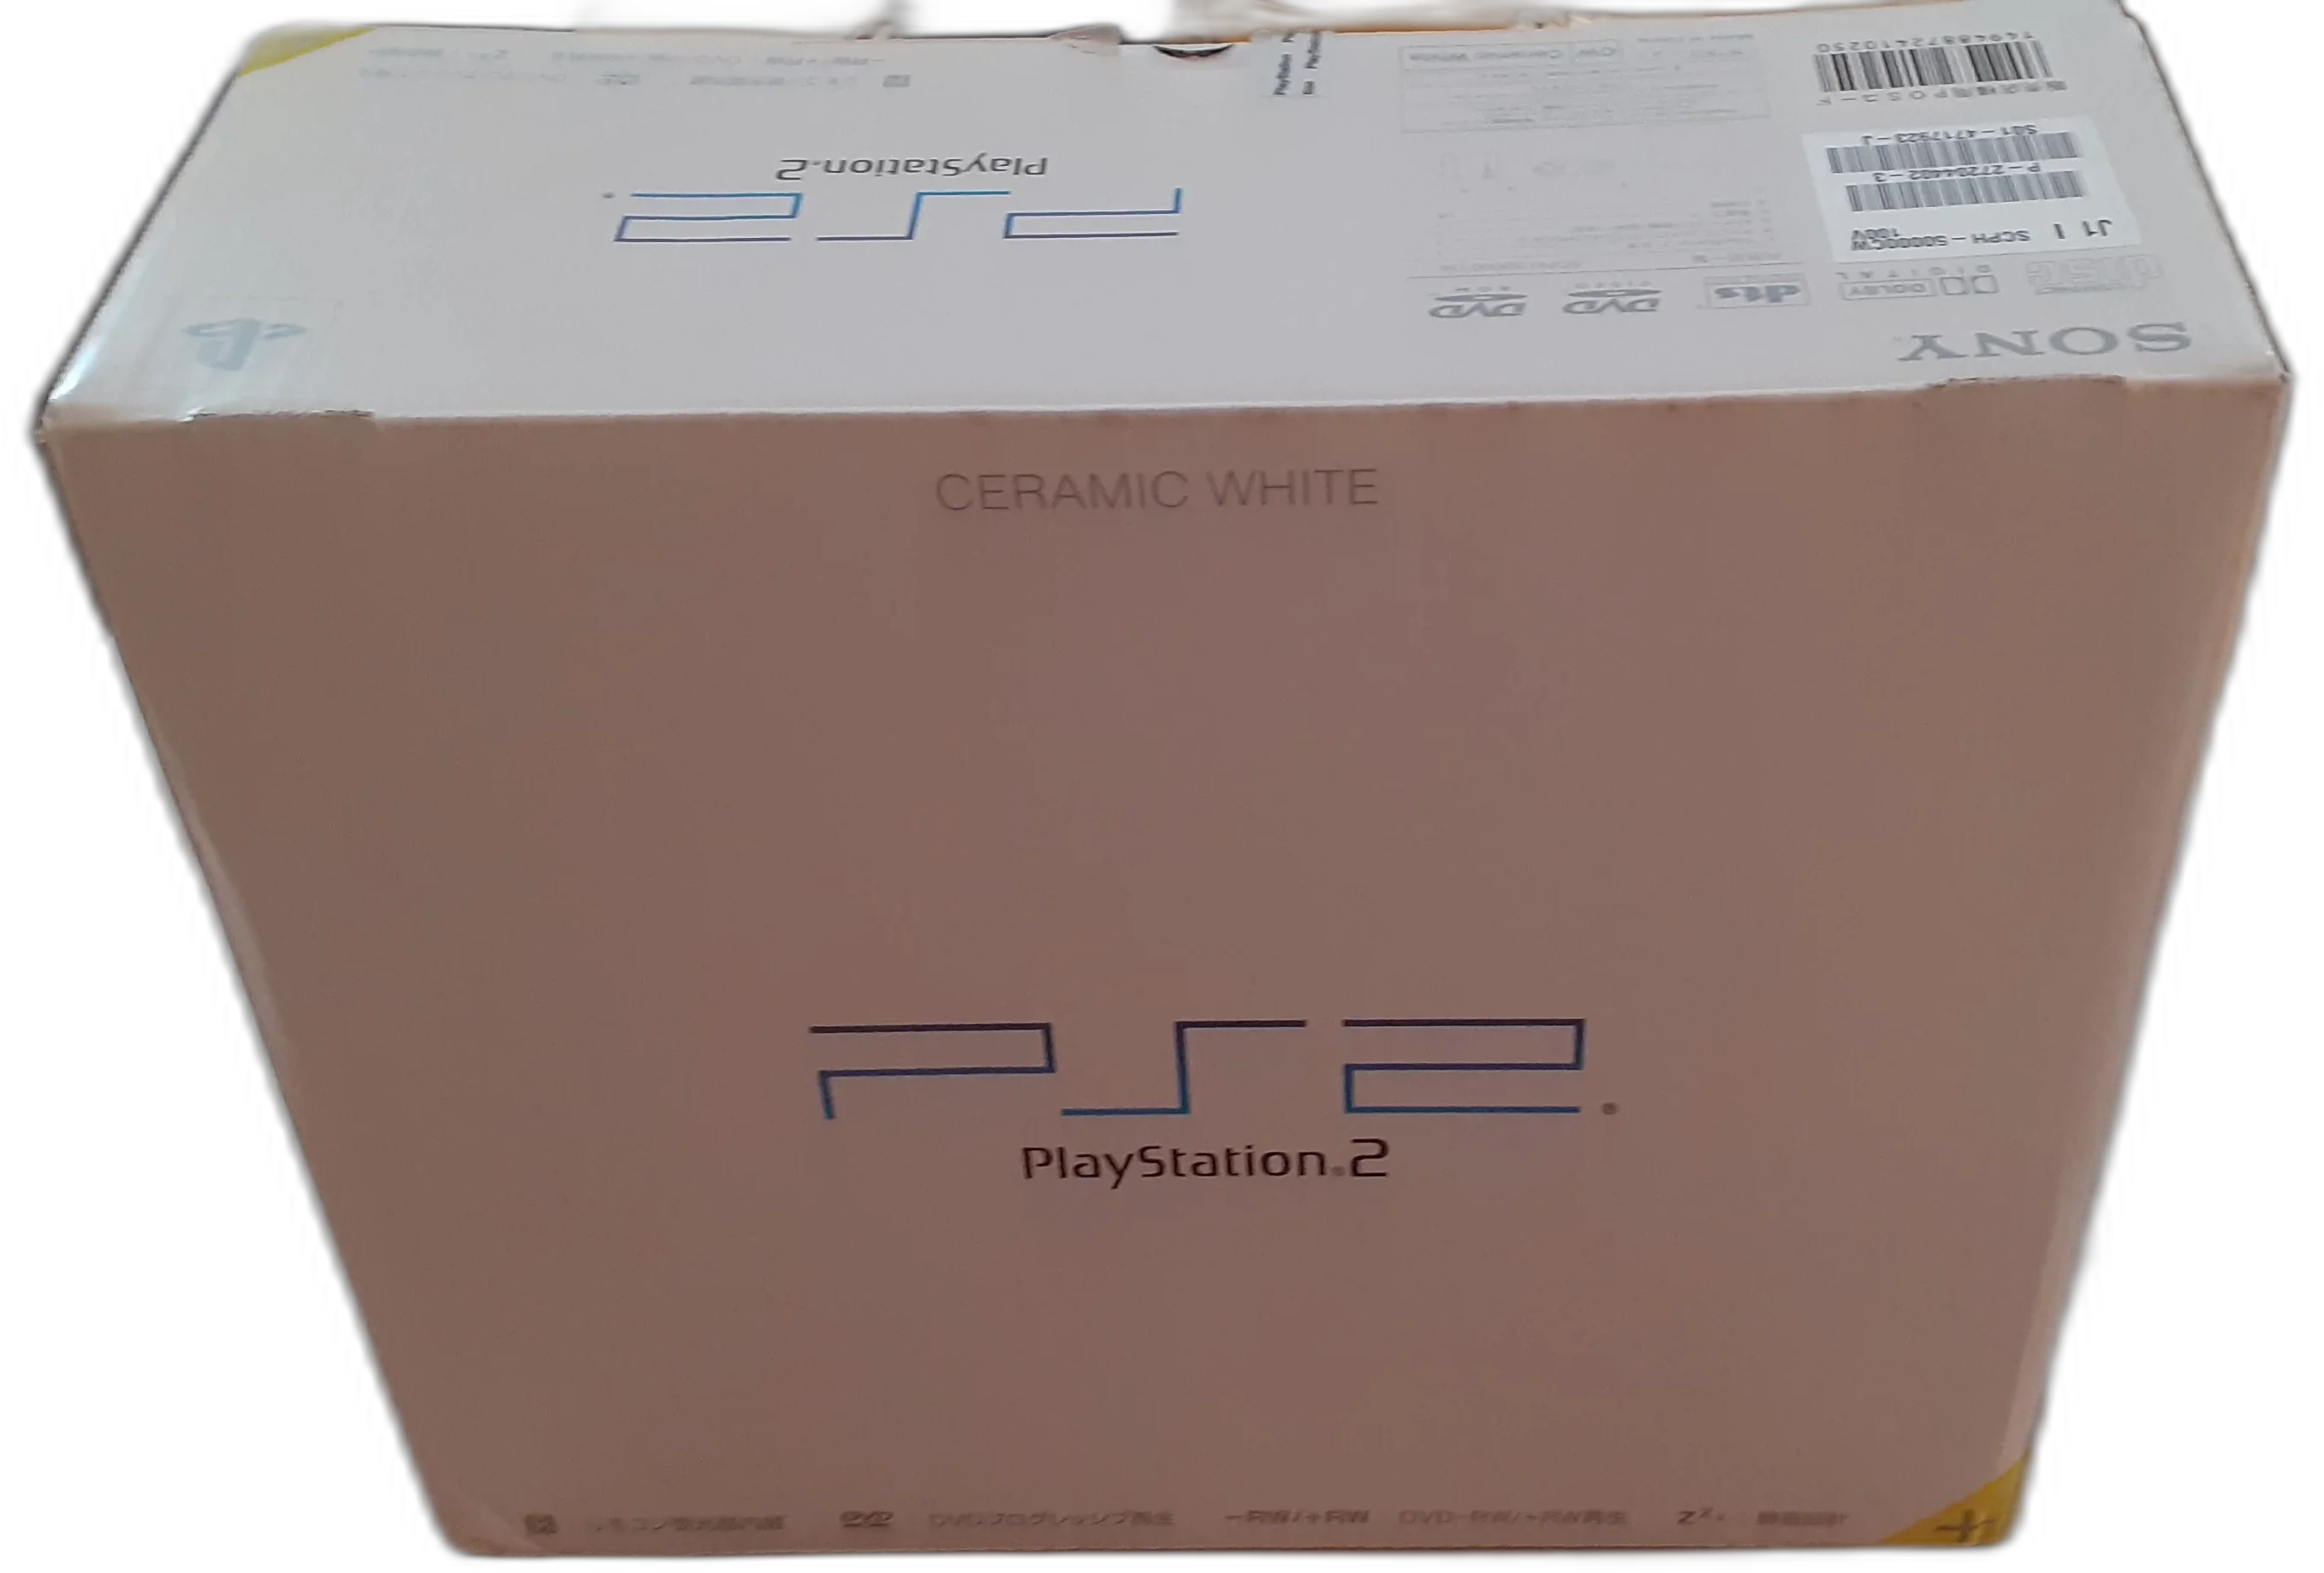  Sony PlayStation 2 Ceramic White Console